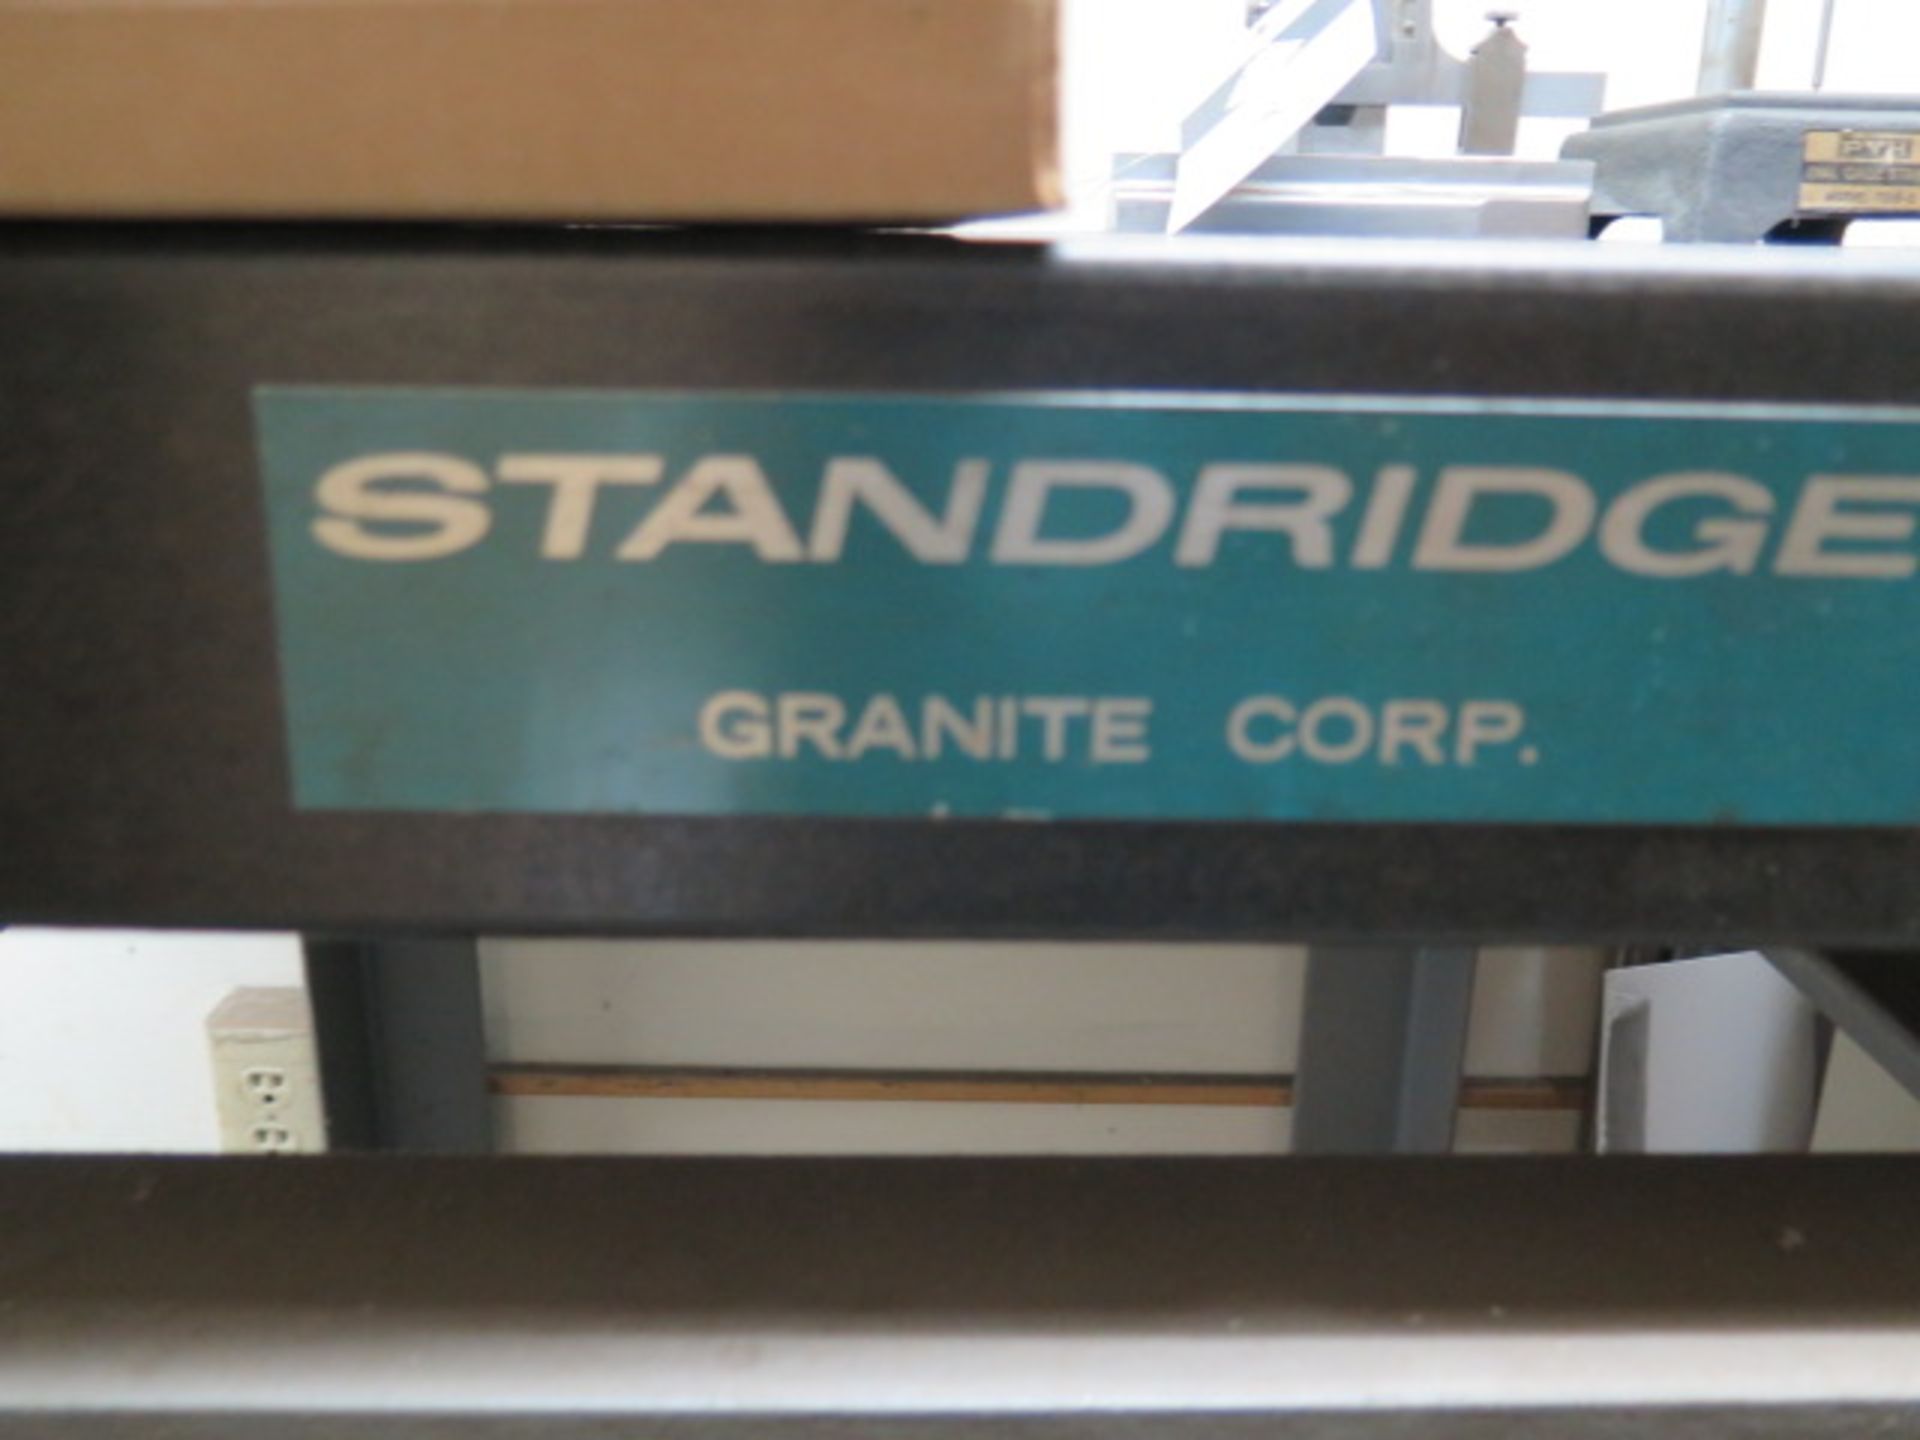 Standridge 24" x 36" x 4 1/2" Granite Surface Plate w/ Stand (SOLD AS-IS - NO WARRANTY) - Image 4 of 4